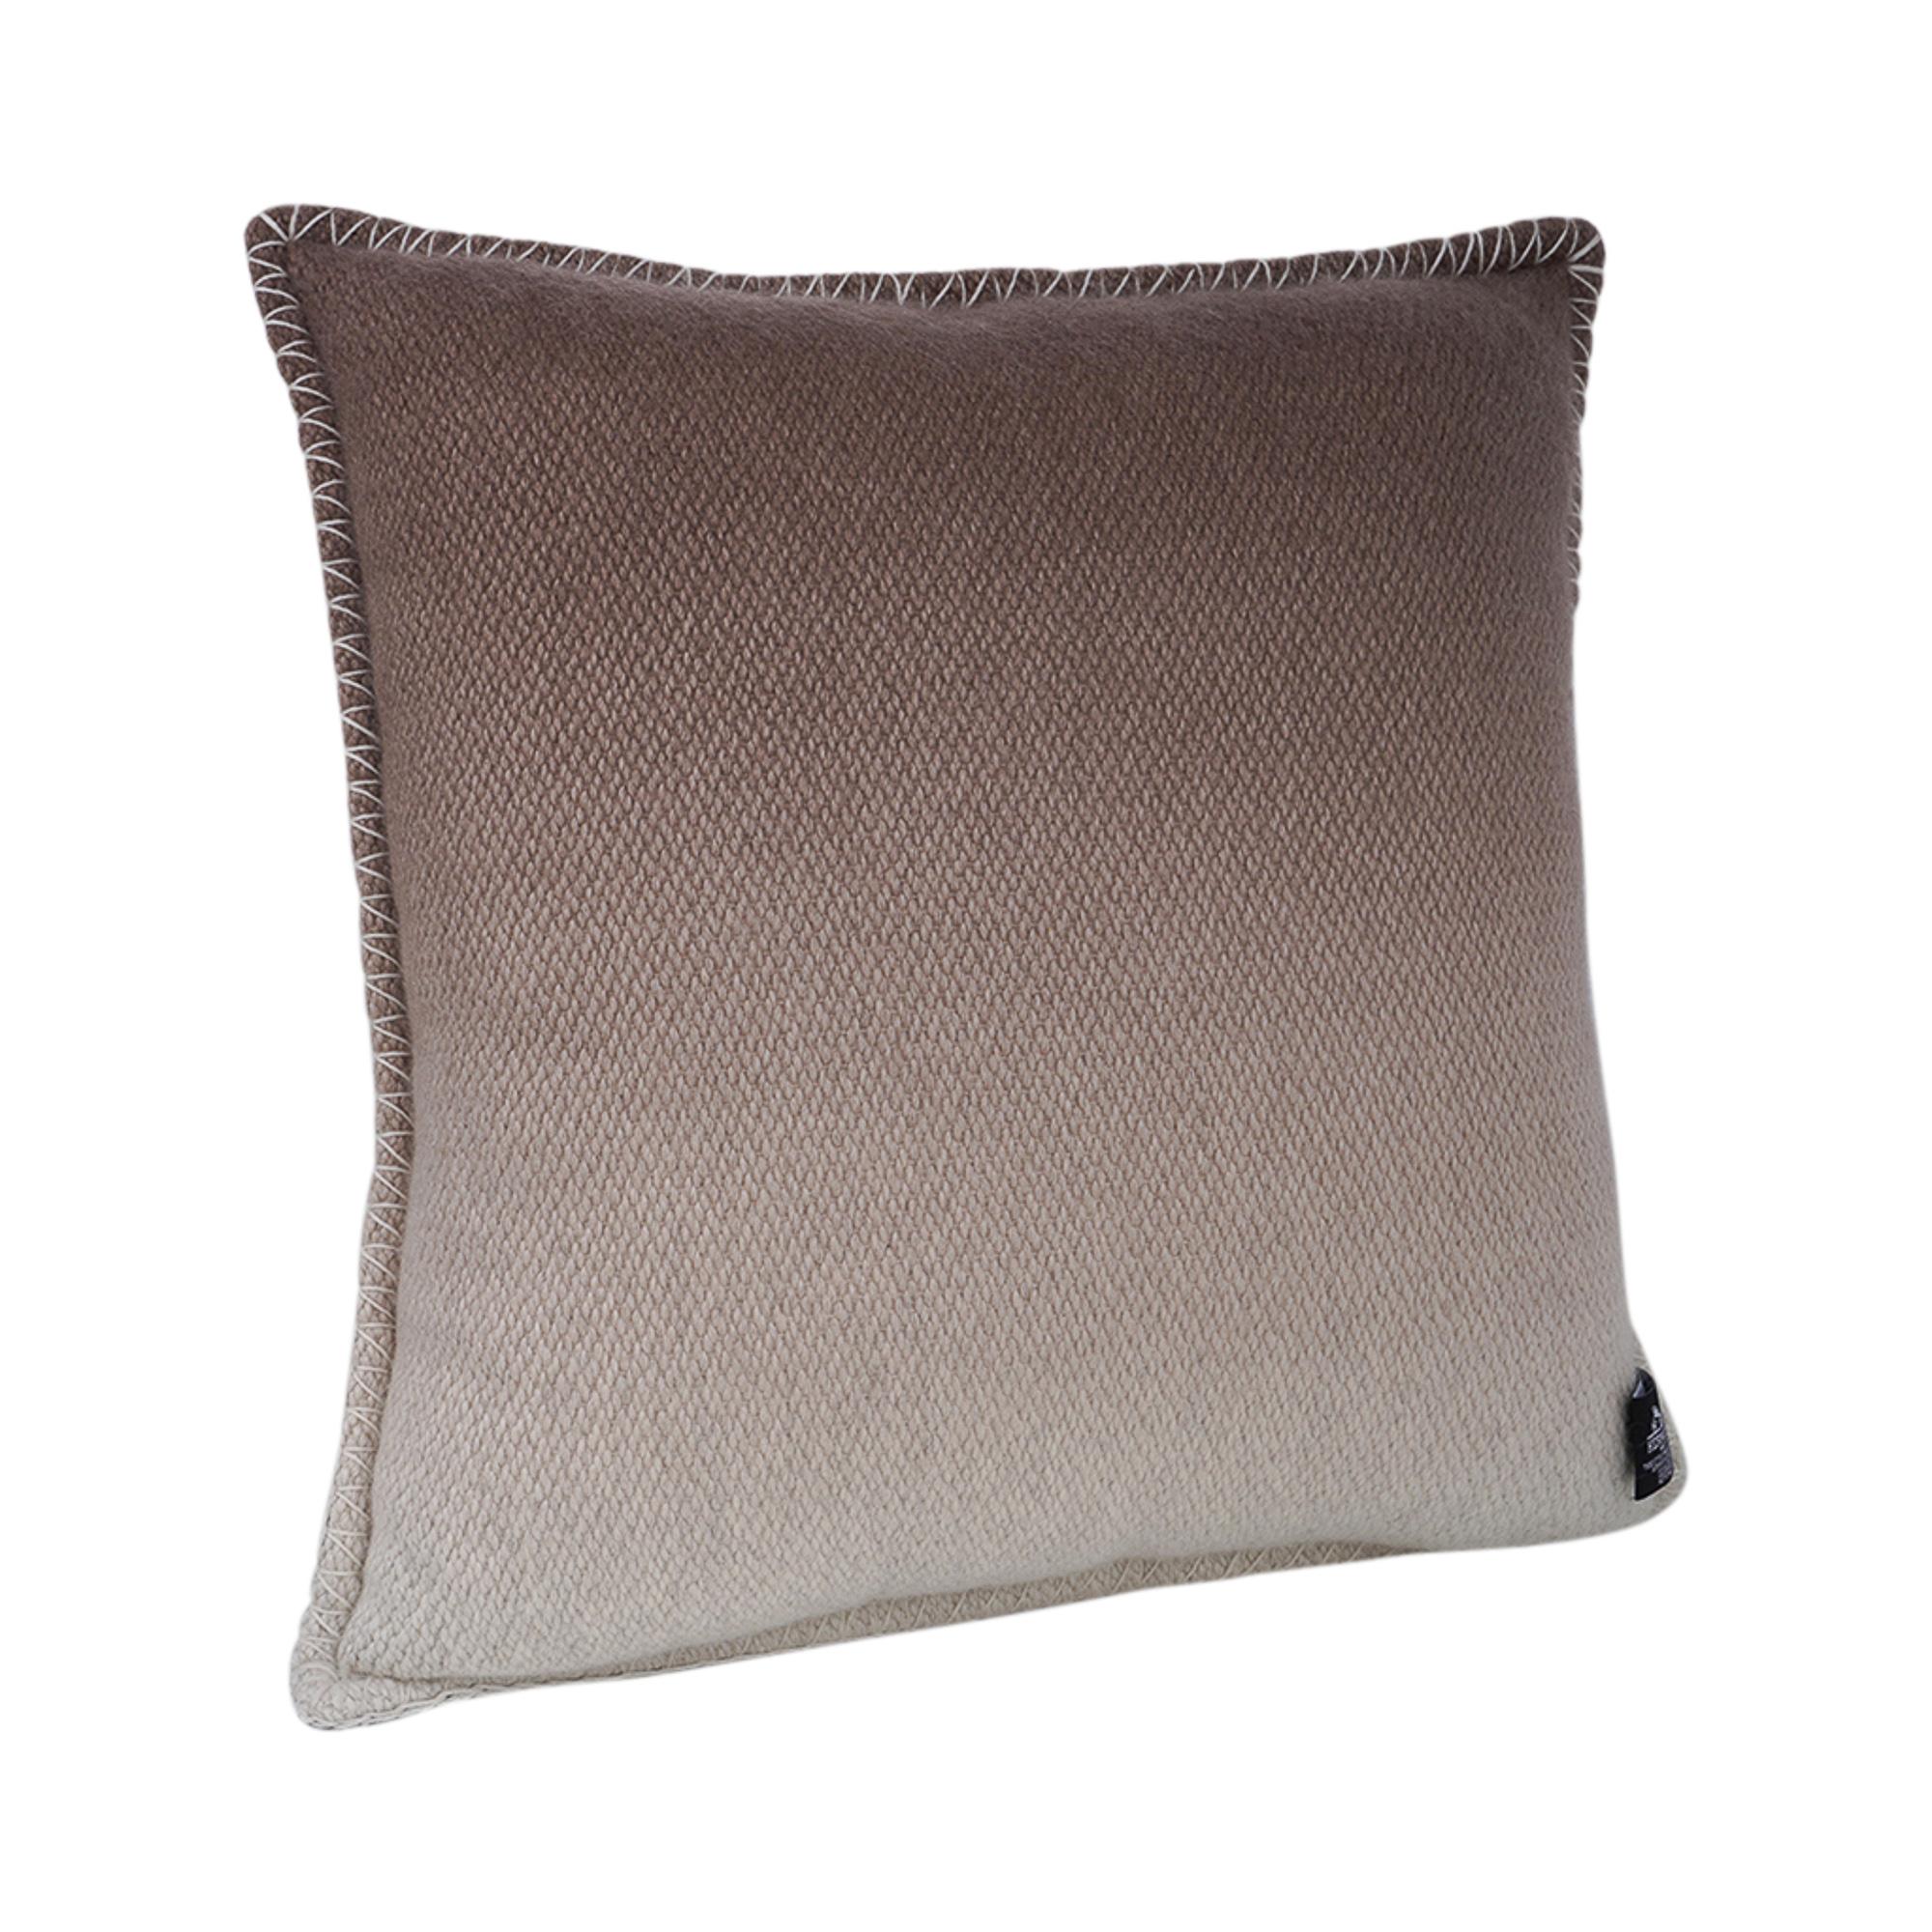 Hermes Yack n' Dye Ombre Pillow Gris / Naturel For Sale 1